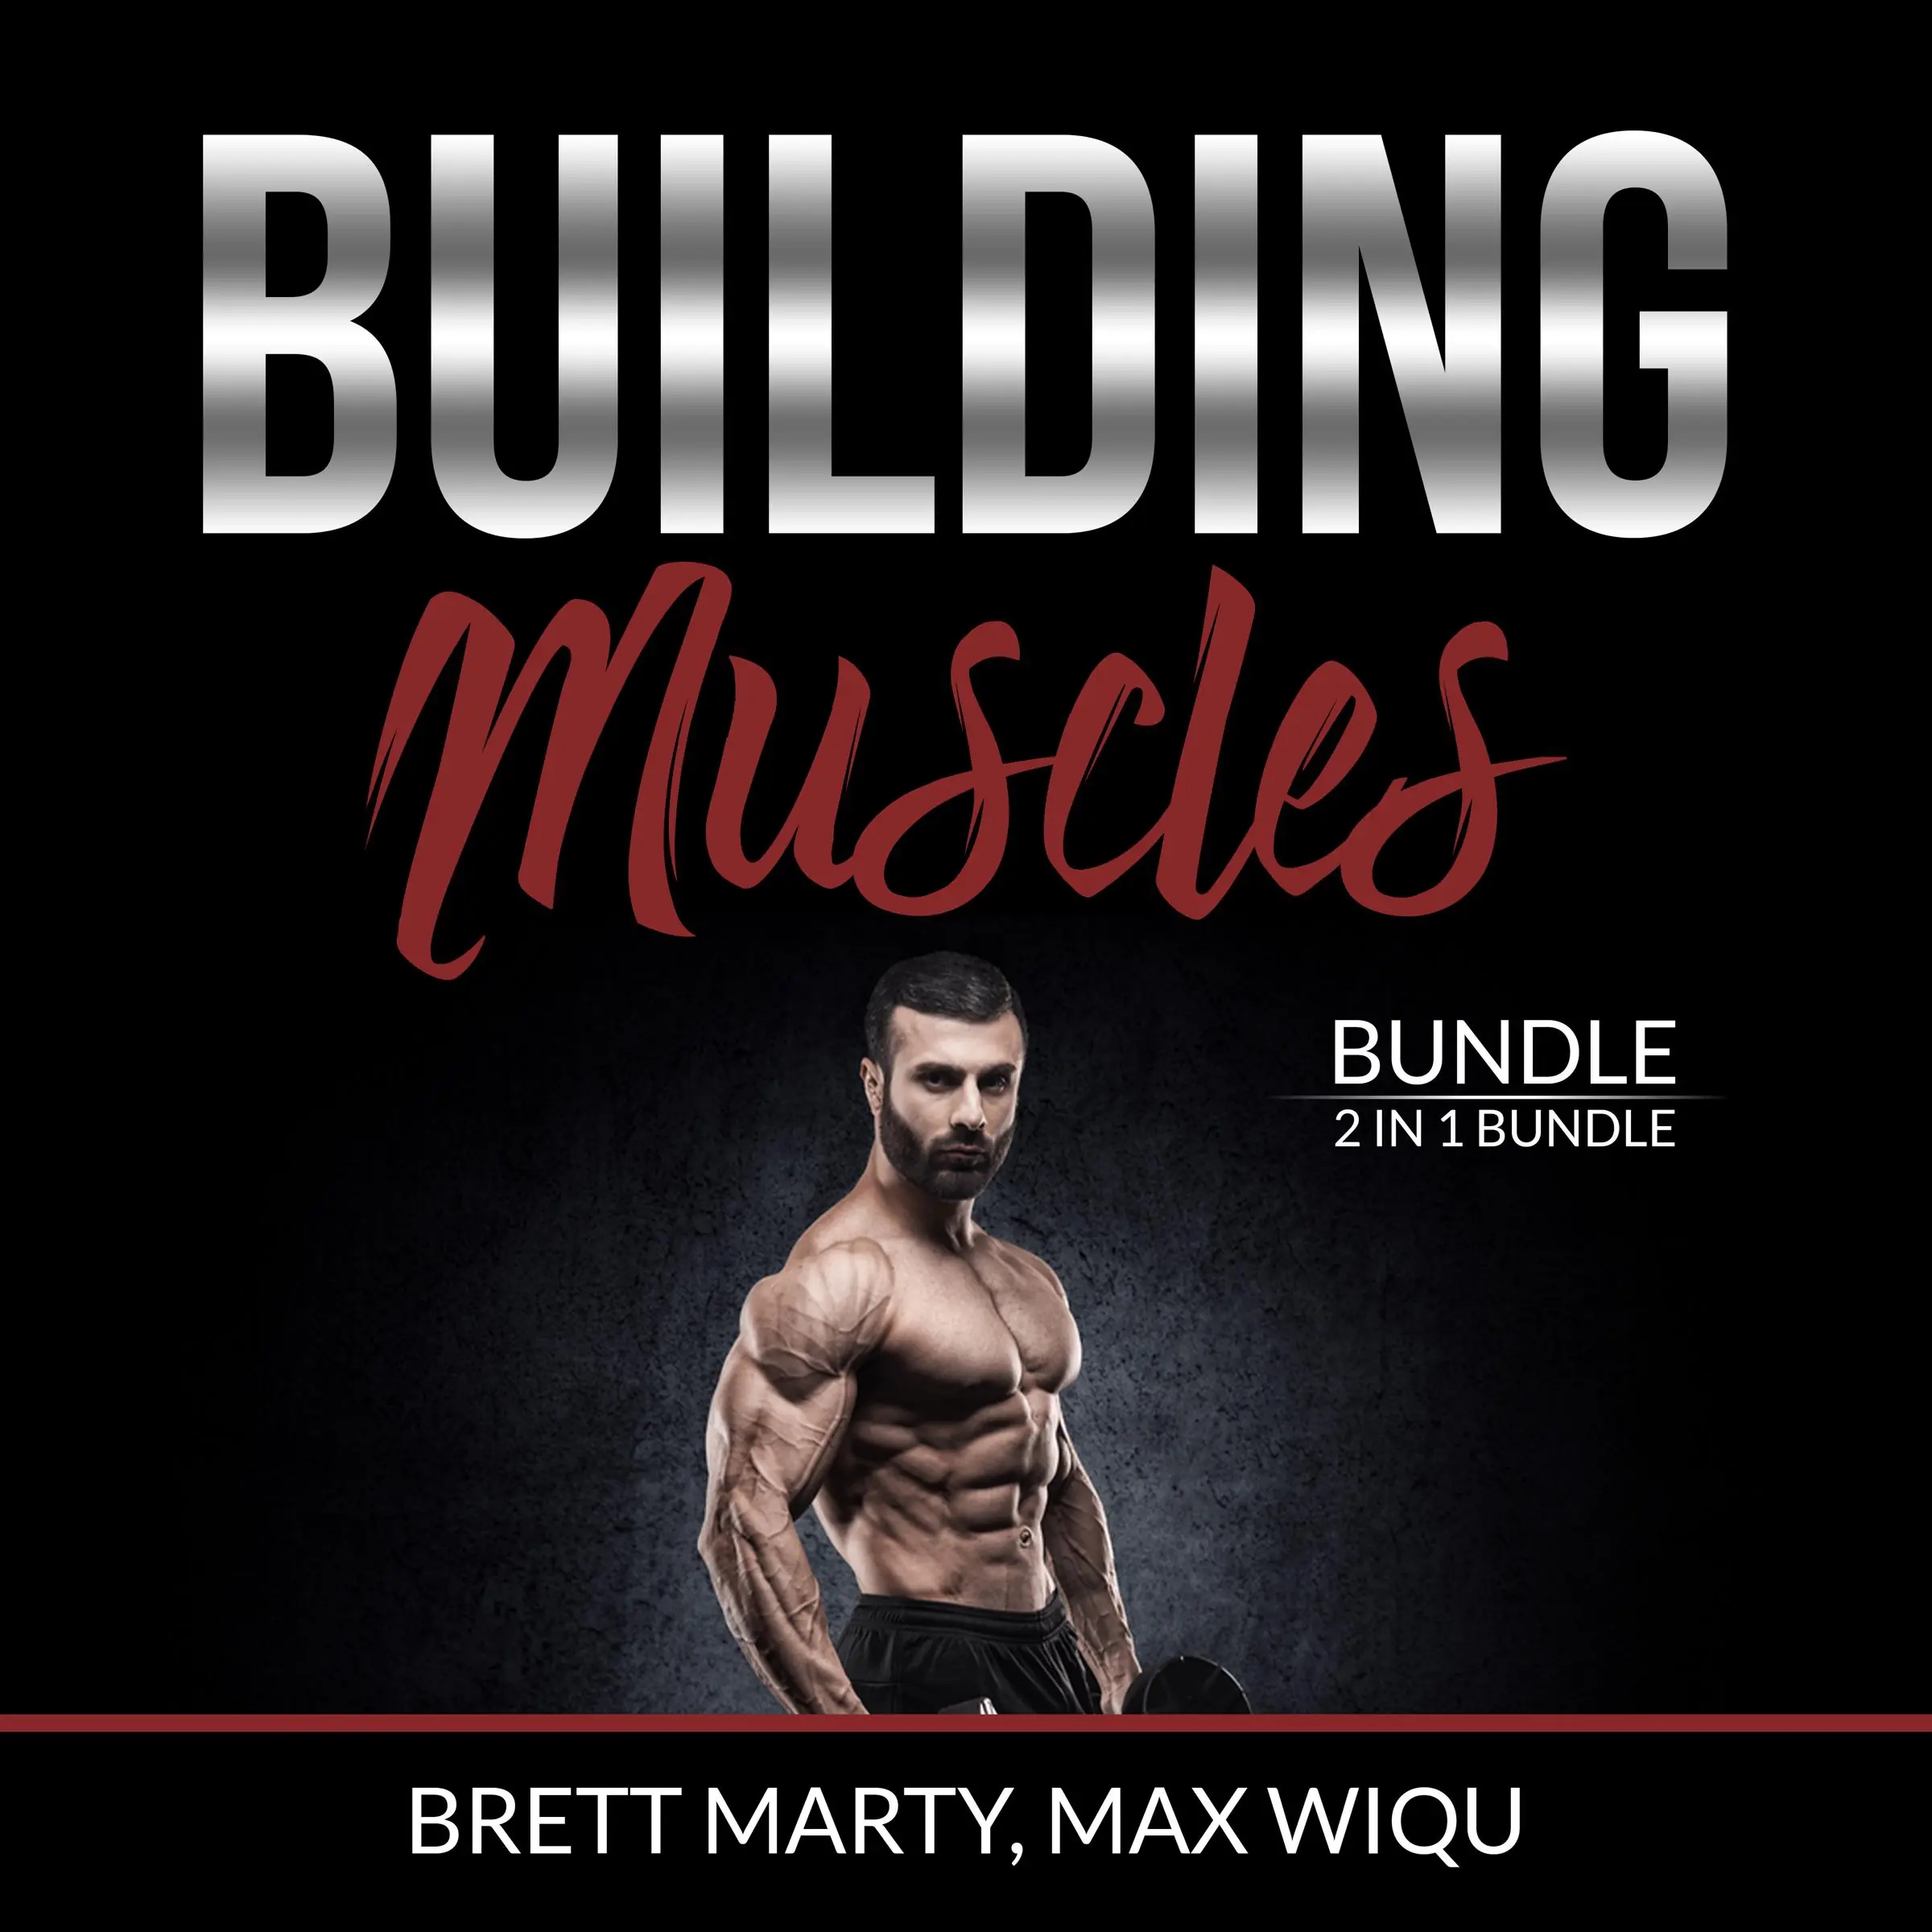 Building Muscles Bundle: 2 in 1 Bundle, Muscles and Strength Training. by and Max Wiqu Audiobook